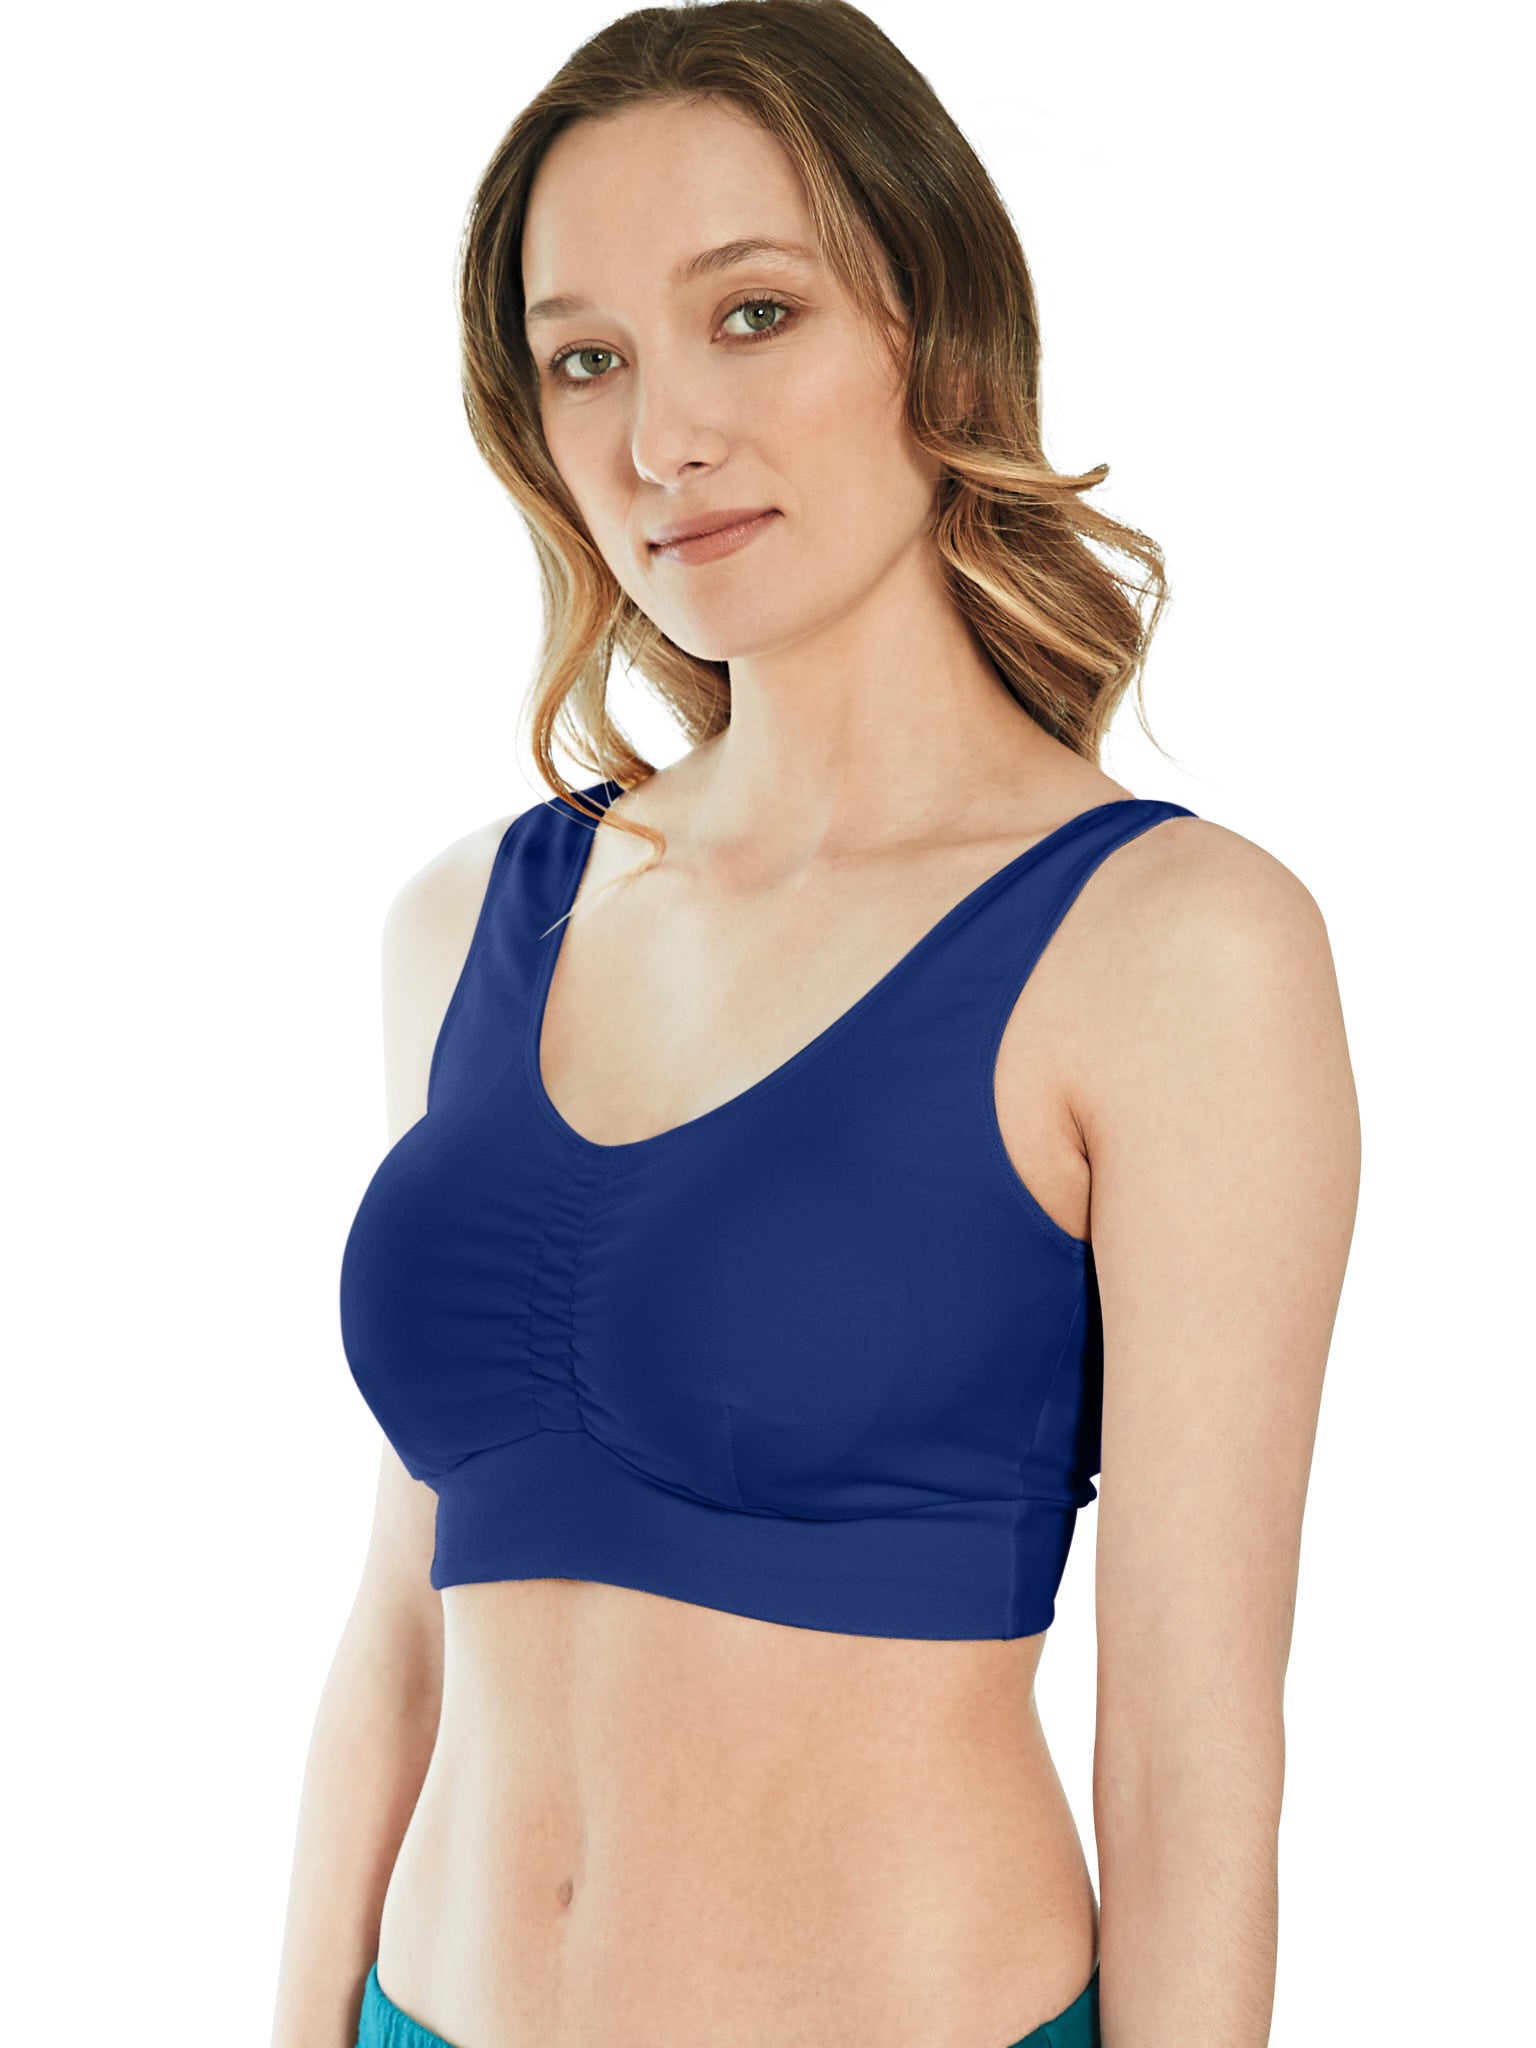  Womens Thin Cotton Cup Large Size Lace Bra Adjustable  Comfortable Breast Underwear Sports Bra Medium Beige : Sports & Outdoors